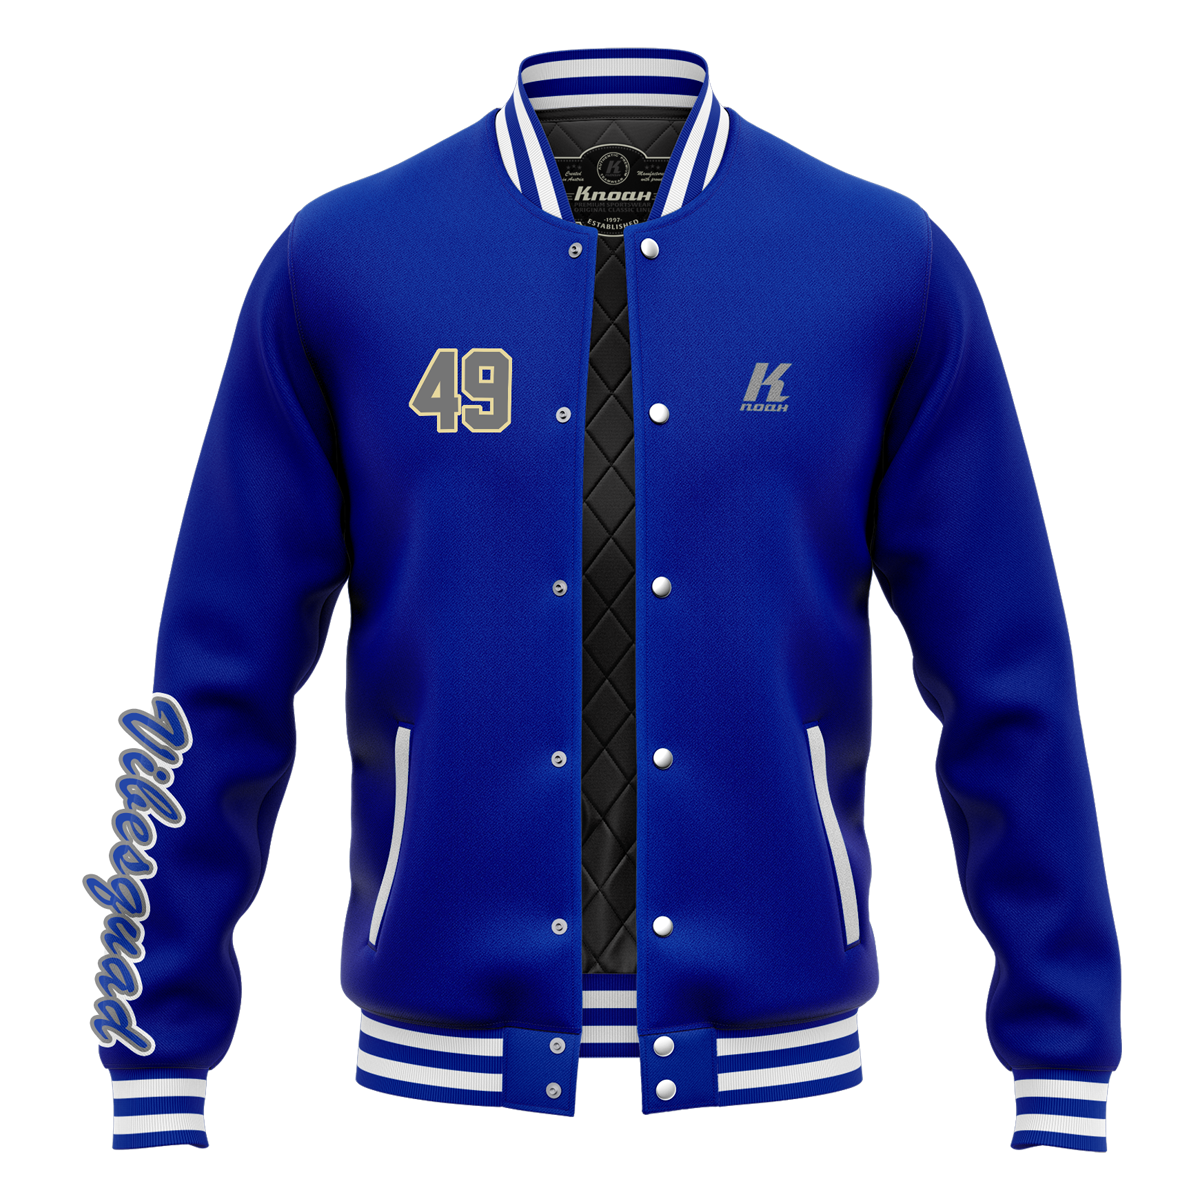 Day 17: "Vibesquad" Authentic Varsity Jacket with Playernumber/Initials